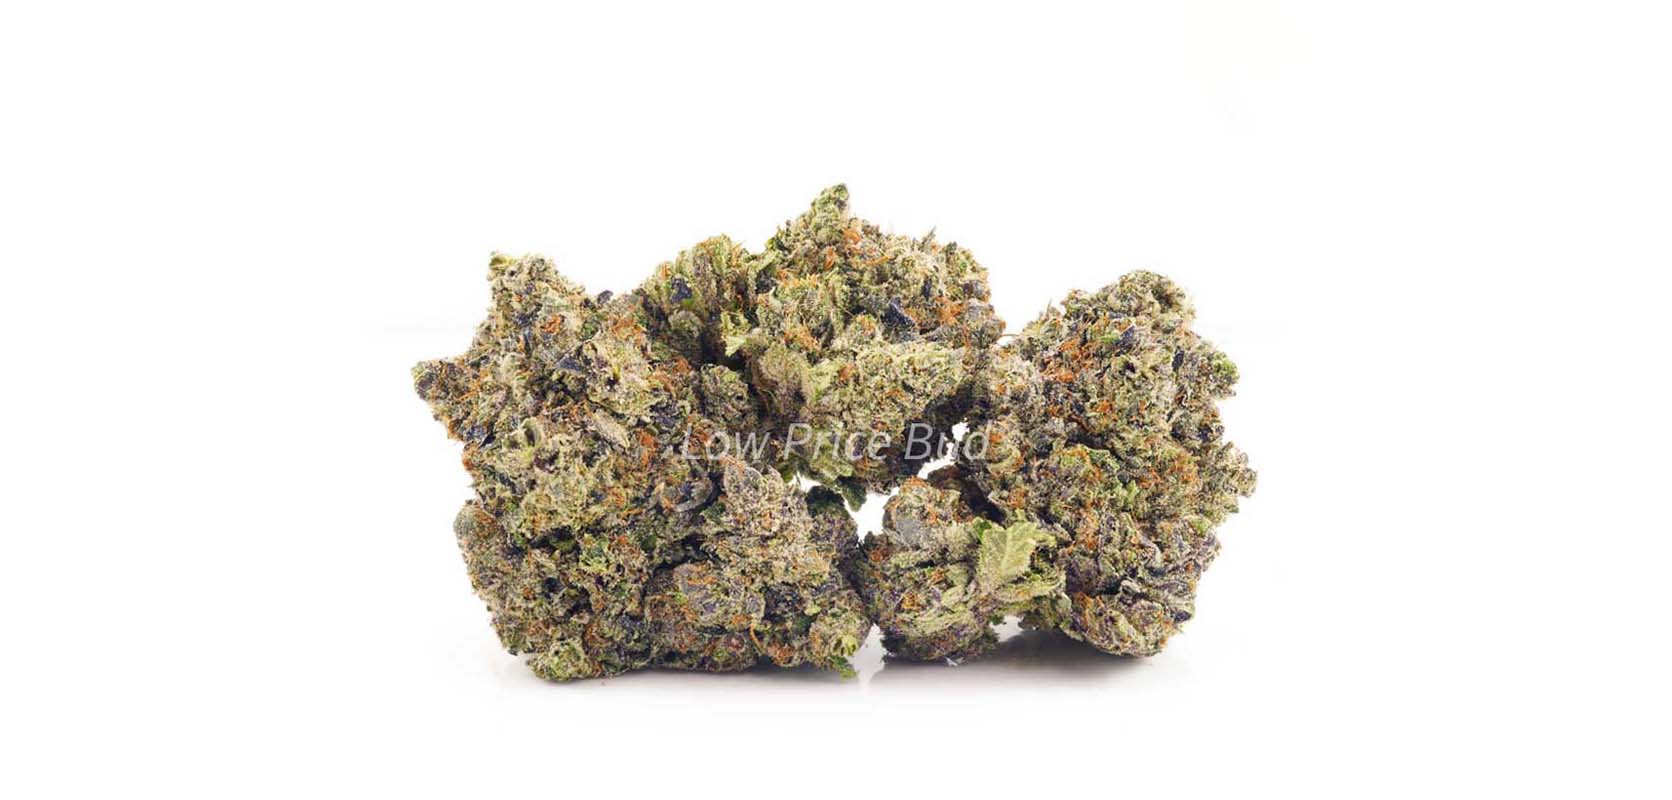 Pink Rob Ford weed online from Low Price Bud online dispensary to order weed online in Canada.